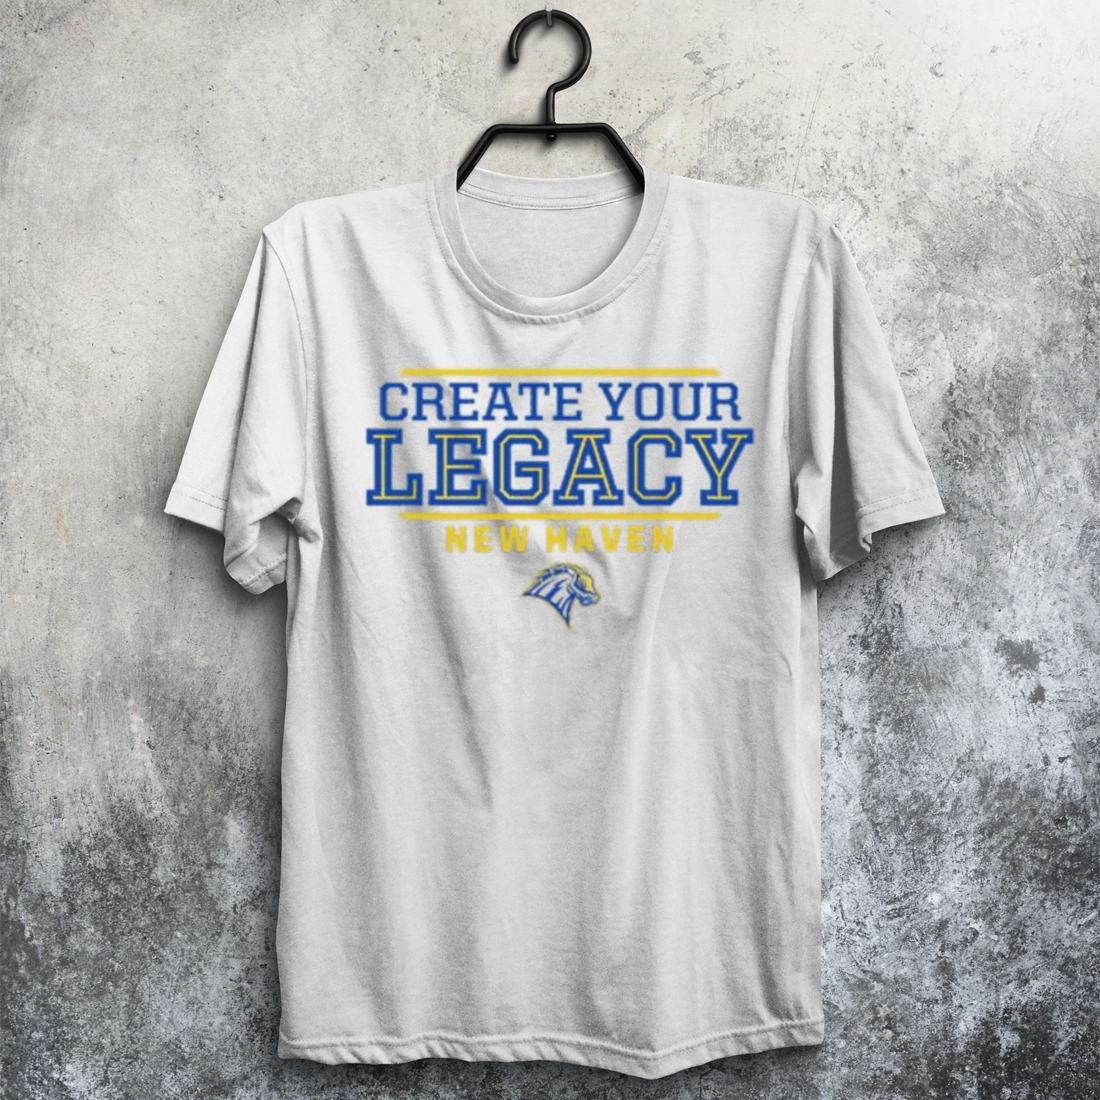 Create your legacy new haven shirt